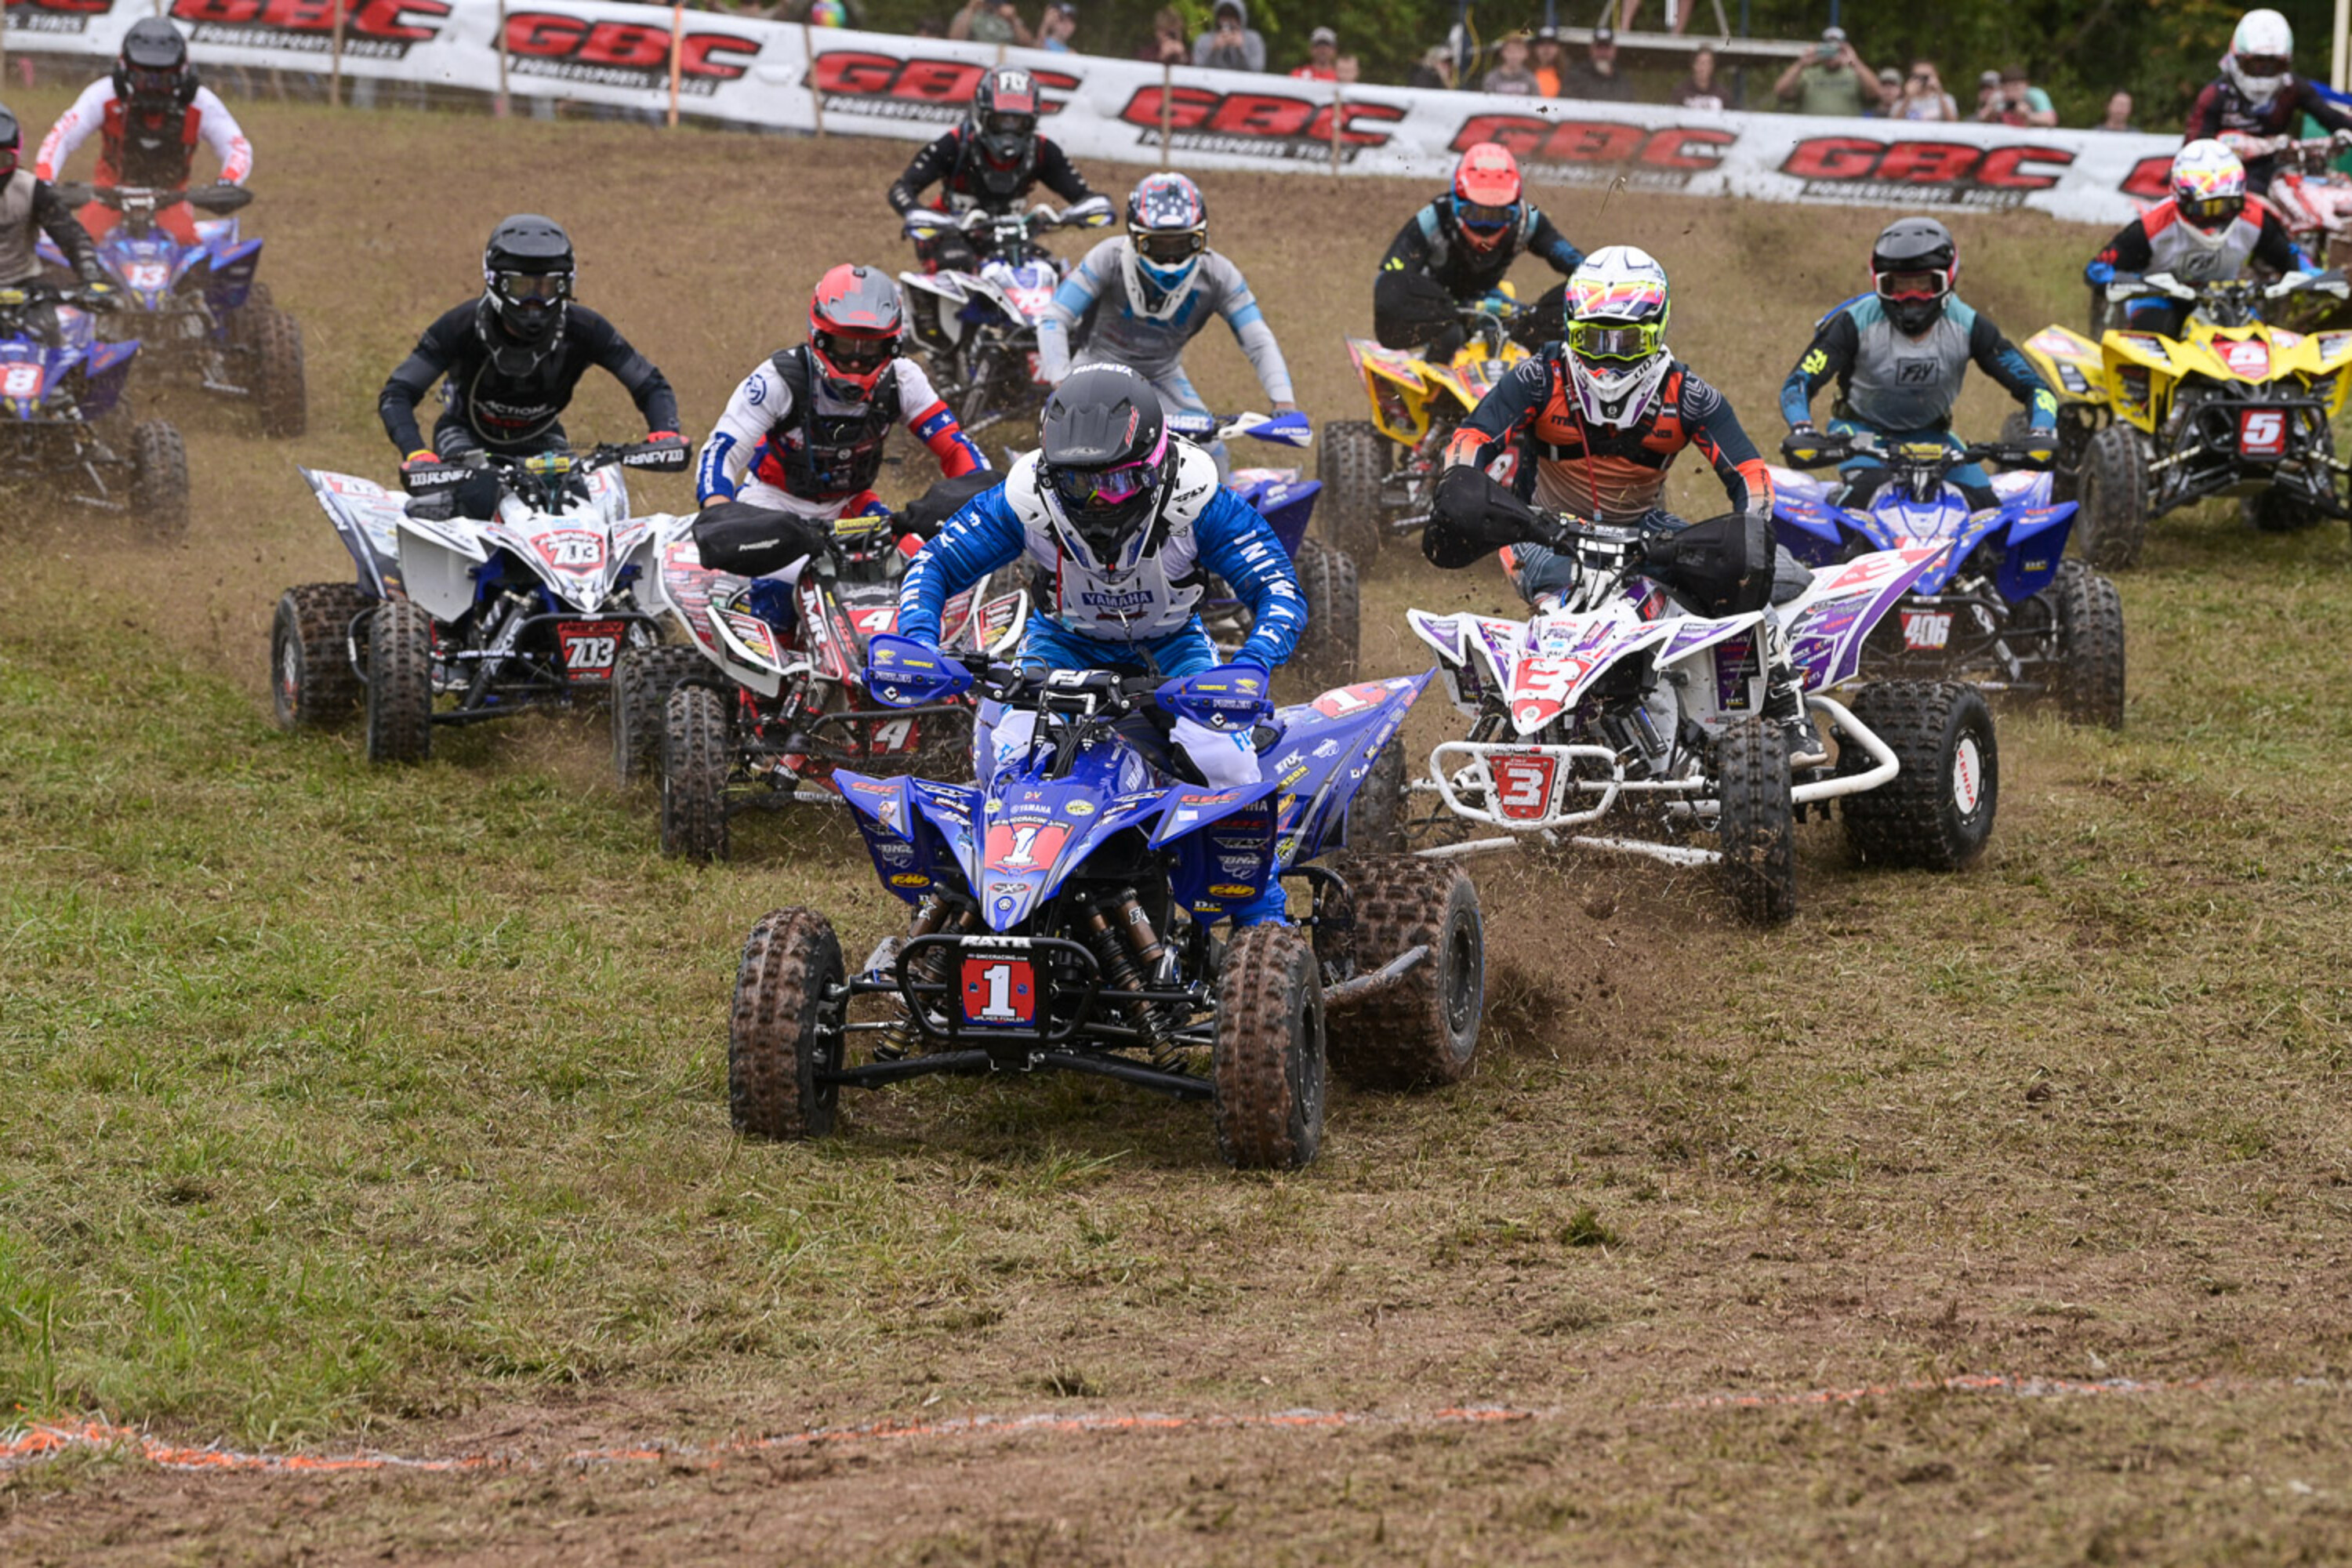 GNCC Racing Announces MultiYear Deals with Six Industry Partners